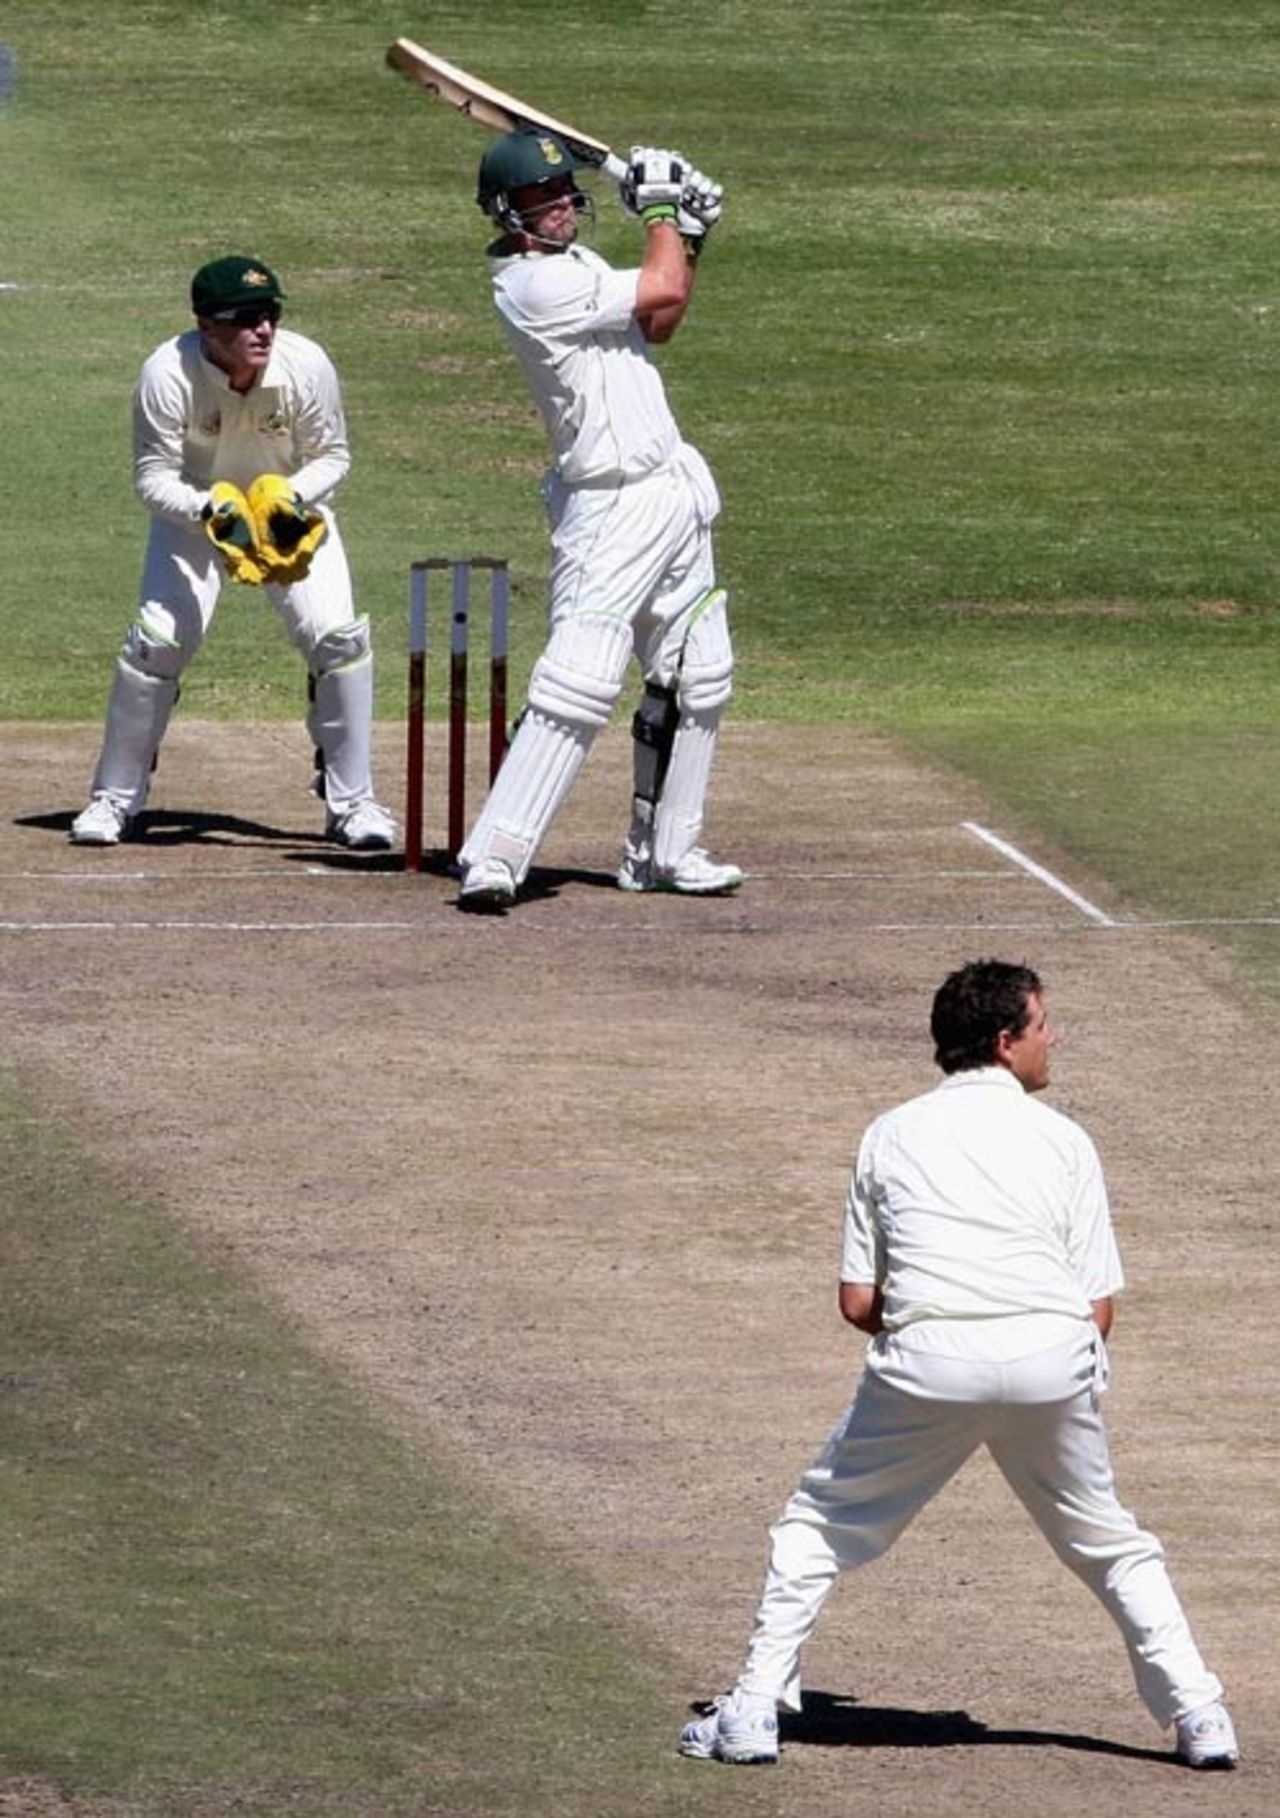 AB de Villiers carts Bryce McGain over midwicket, South Africa v Australia, 3rd Test, 3rd day, Cape Town, March 21, 2009